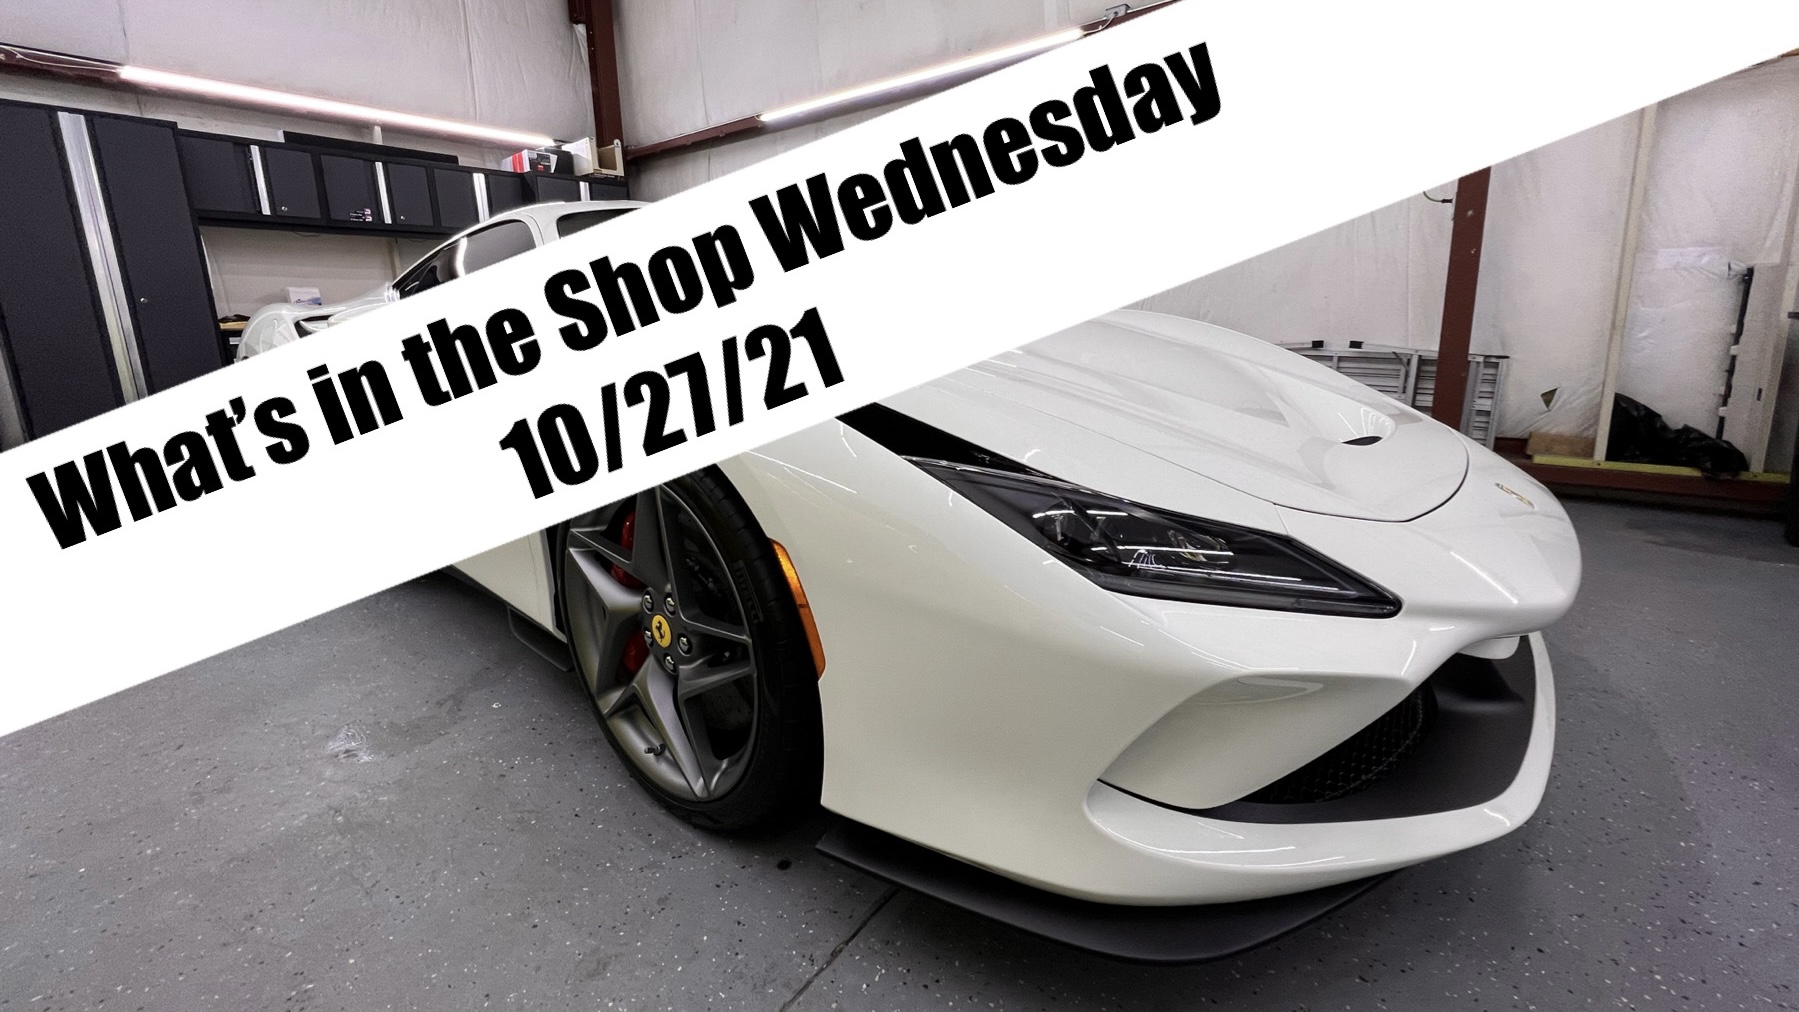 What’s in the Shop Wednesday 10/27/21